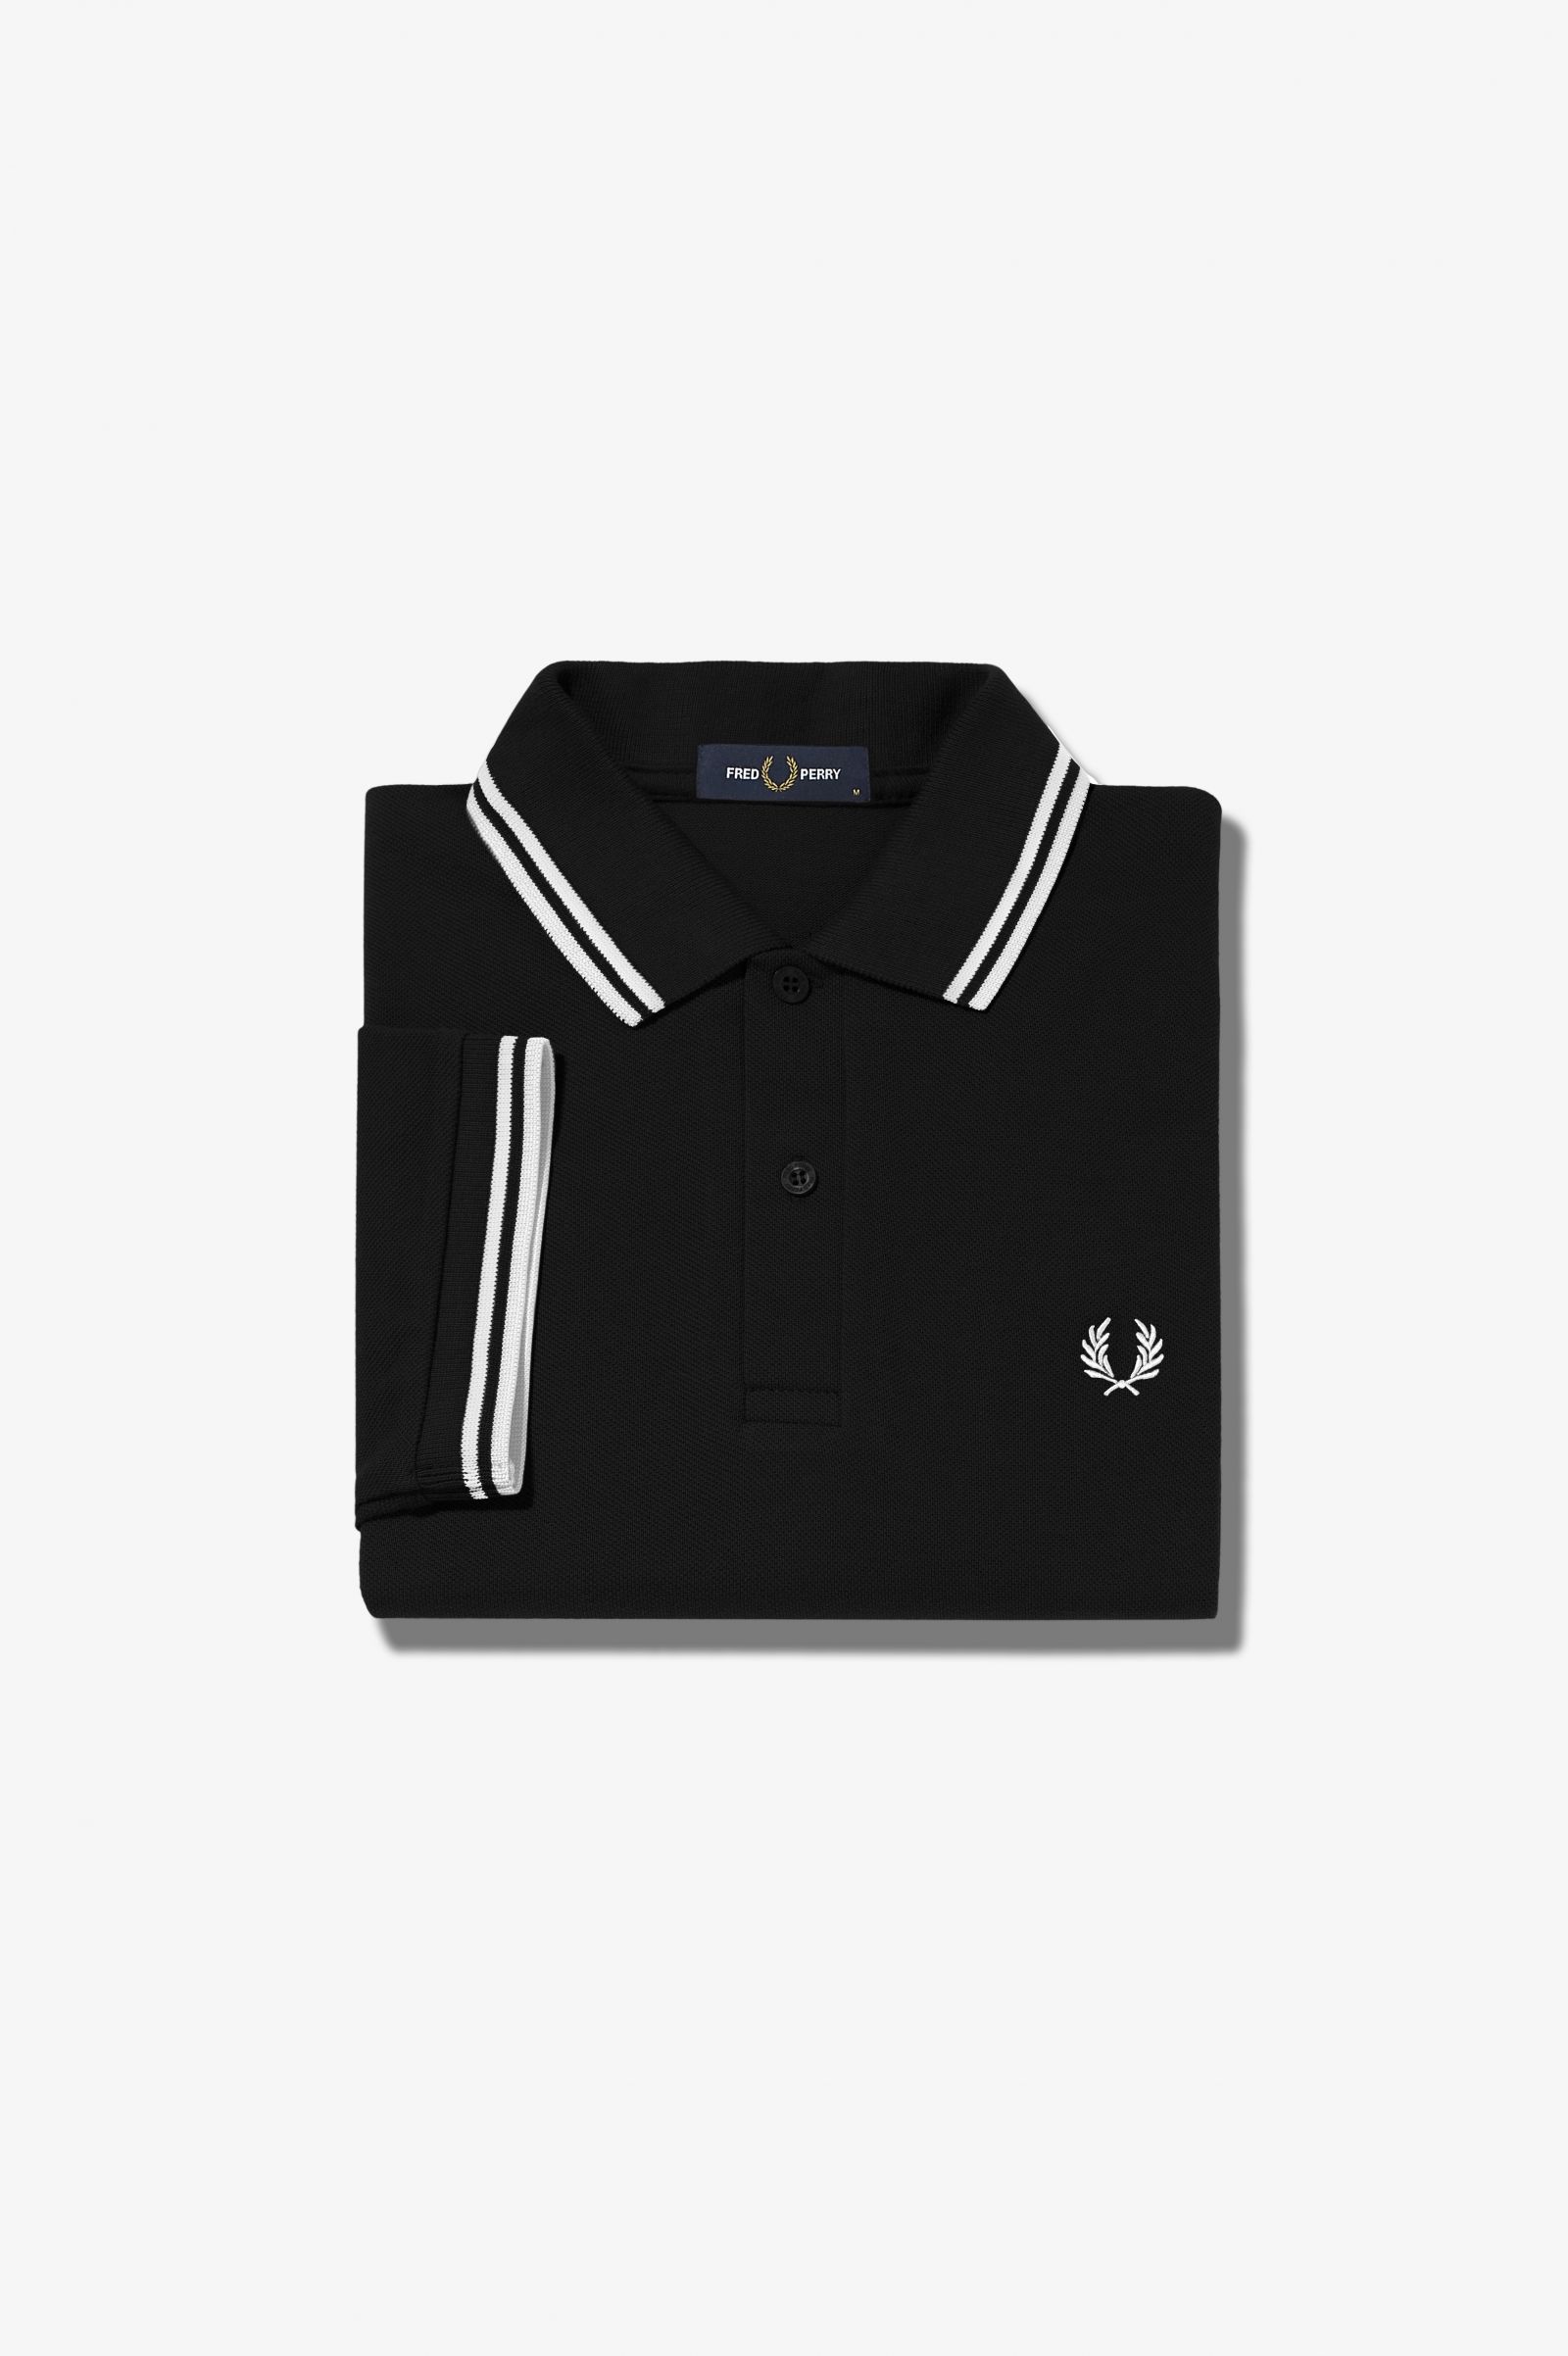 M3600 - Navy / White / White, The Fred Perry Shirt